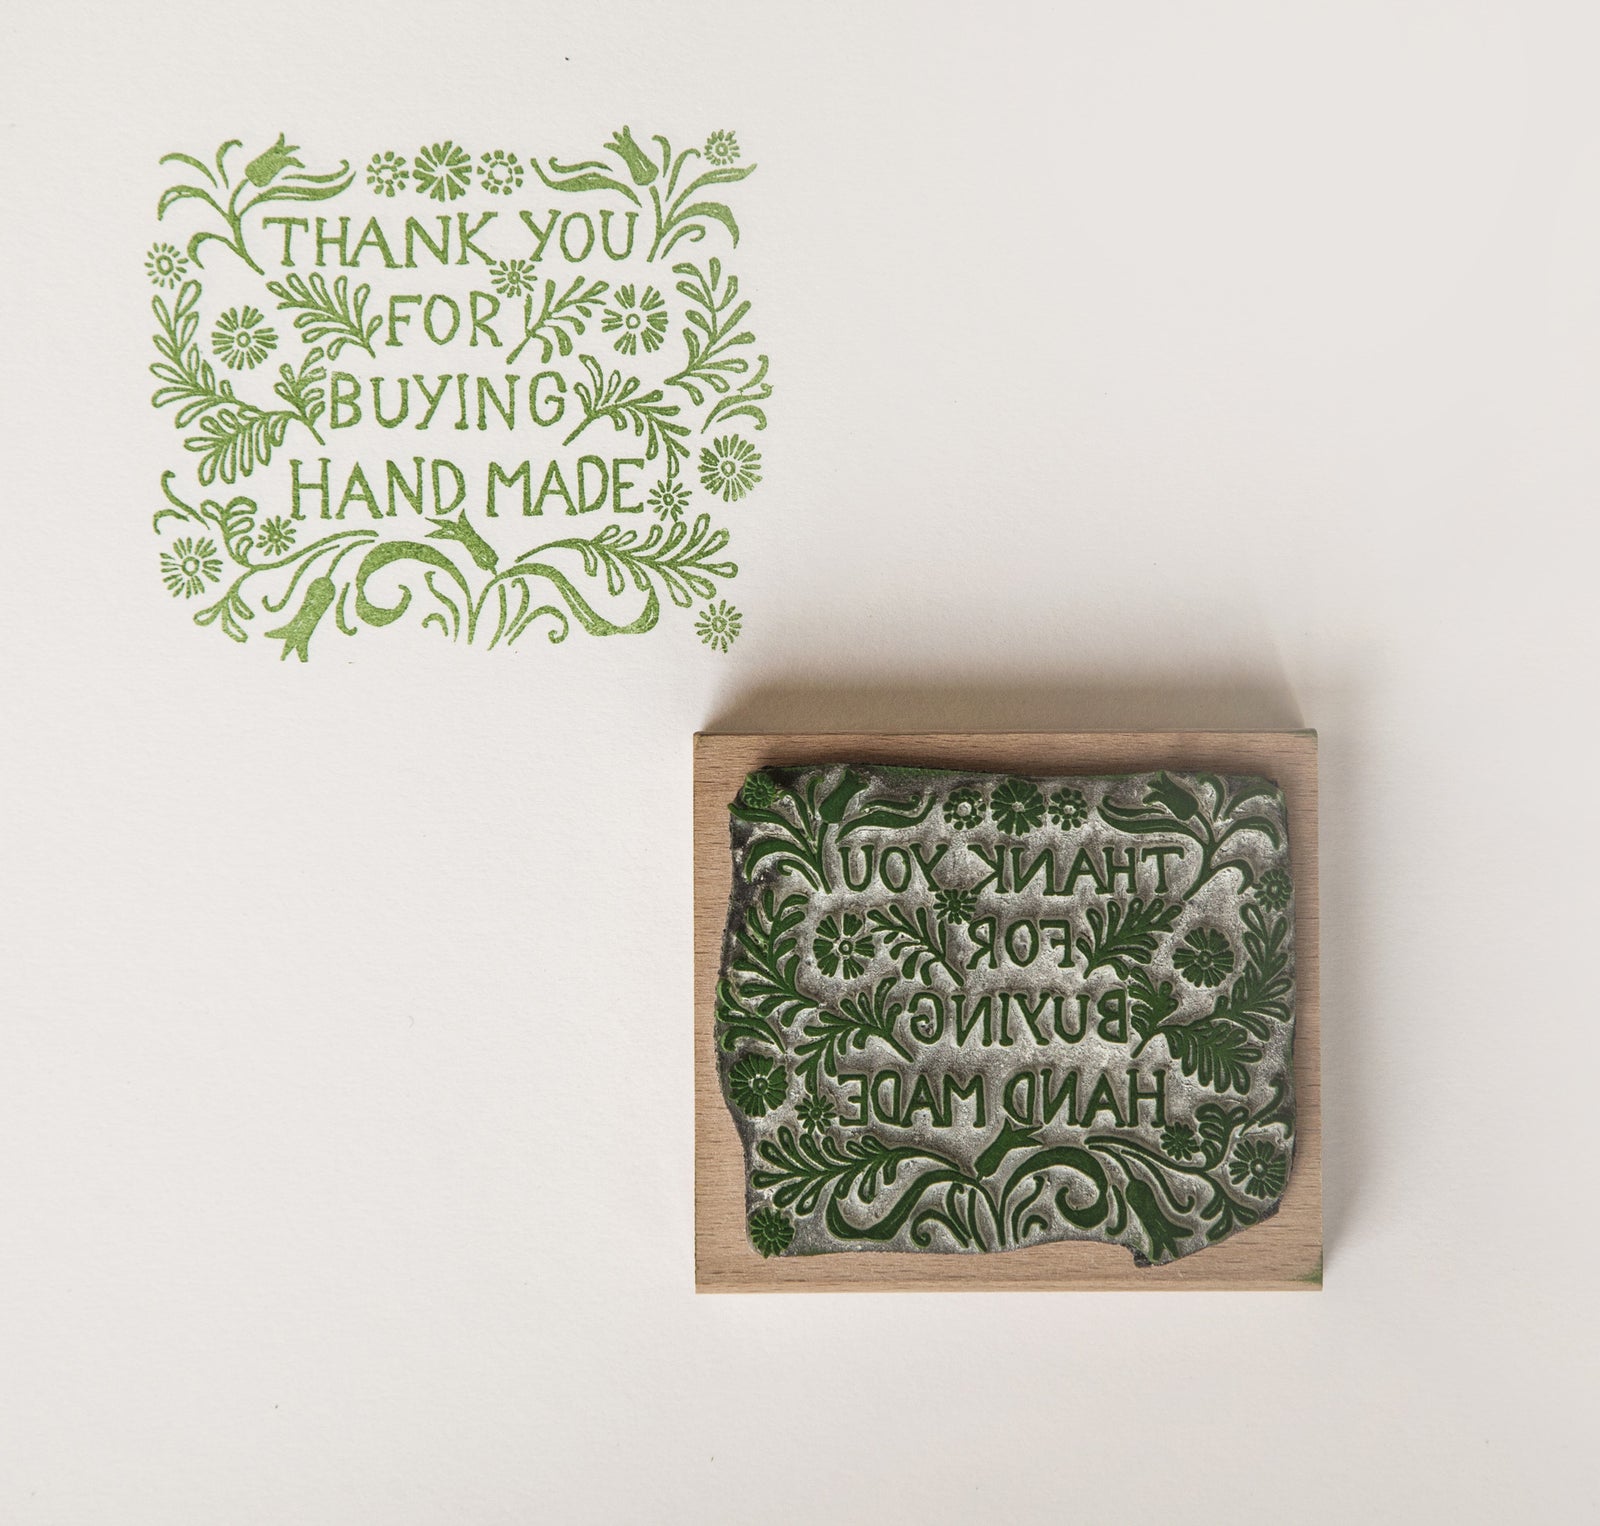 New Rubber Stamps to Celebrate Buying Handmade